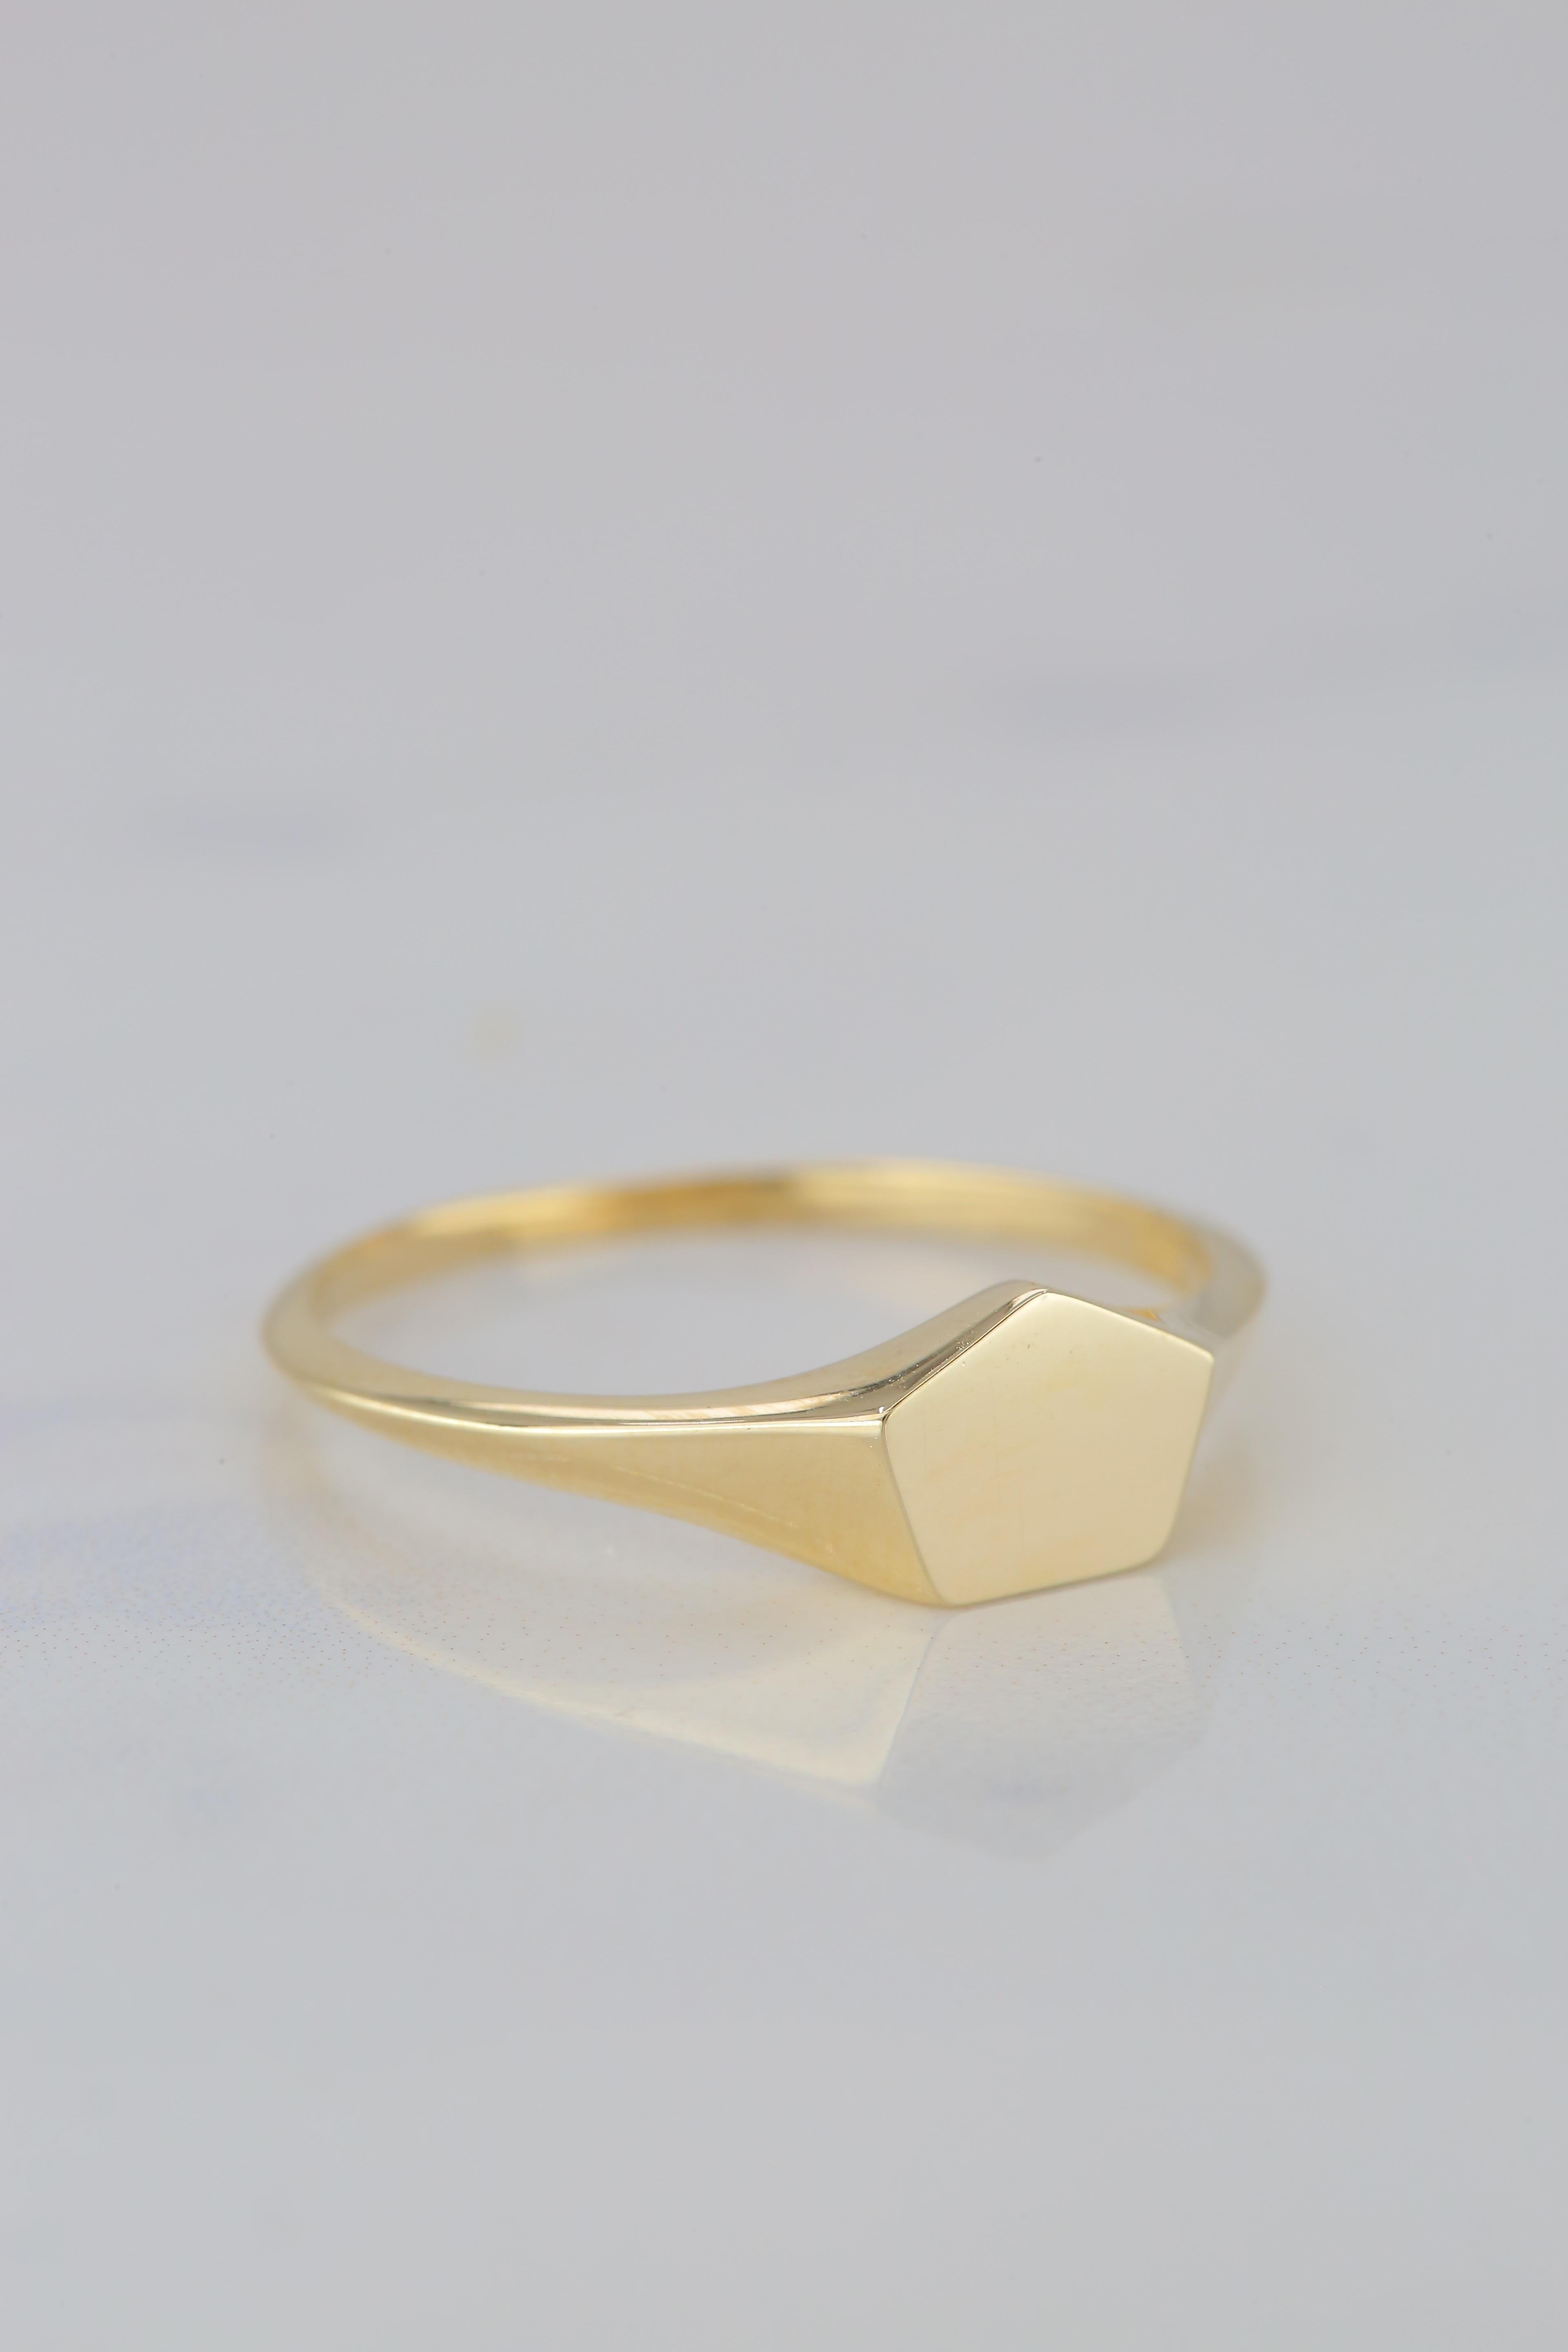 For Sale:  Pinky Signet Ring, 14K Gold Pinky Pentagon Signet Ring, Small Pentagonal Ring 6